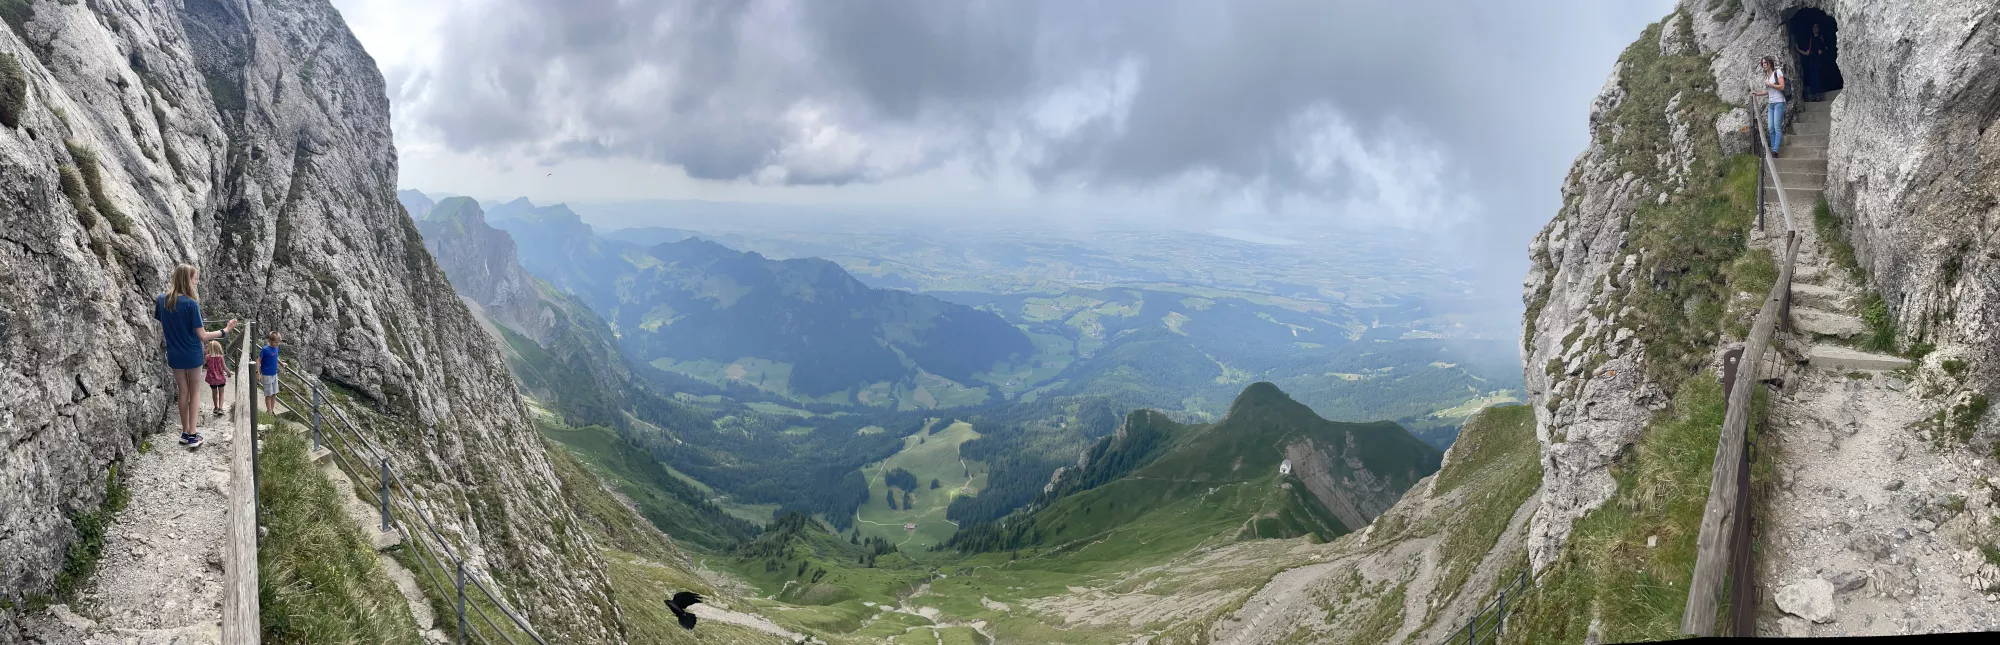 Scenic view of the Swiss Alps from Mount Pilatus.